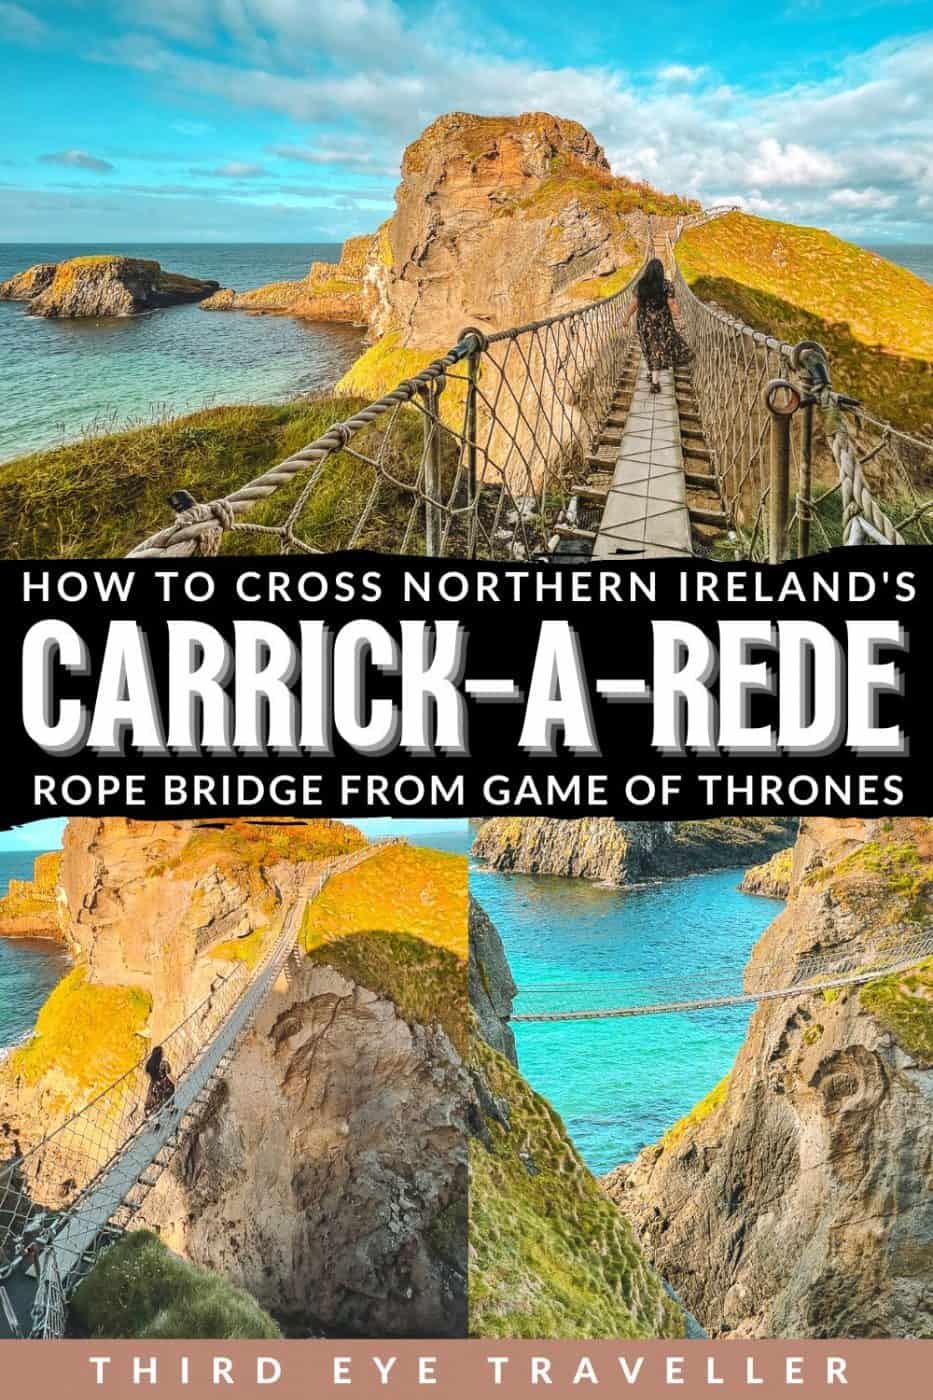 How to Cross Carrick-a-Rede Rope Bridge Game of Thrones